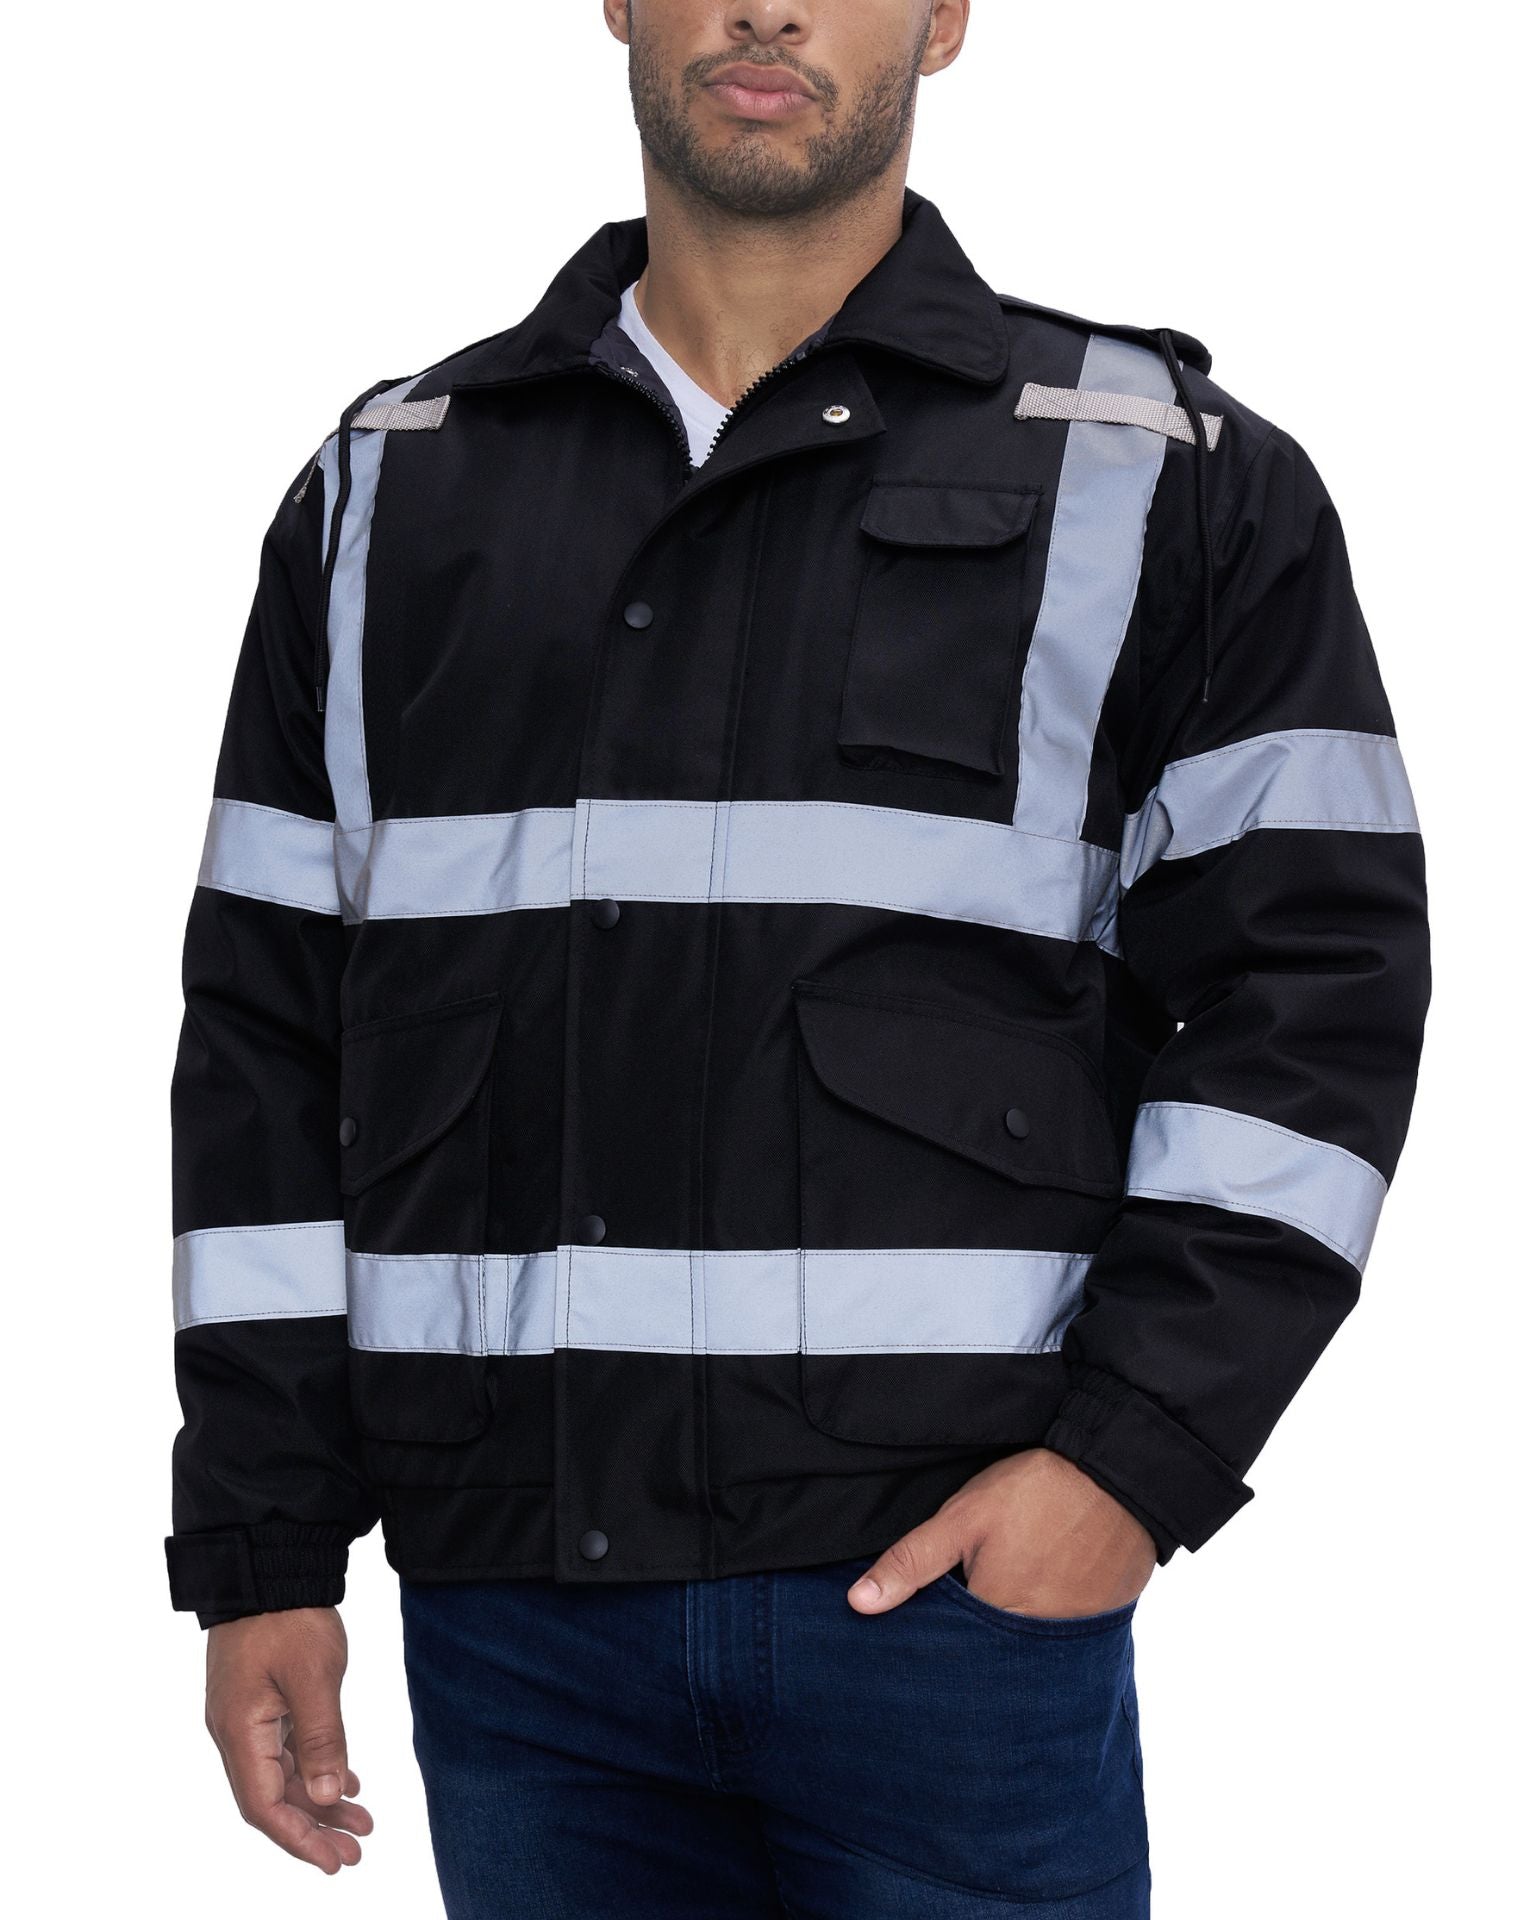 UPA562 HiVis Quilt Lined Bomber Jacket